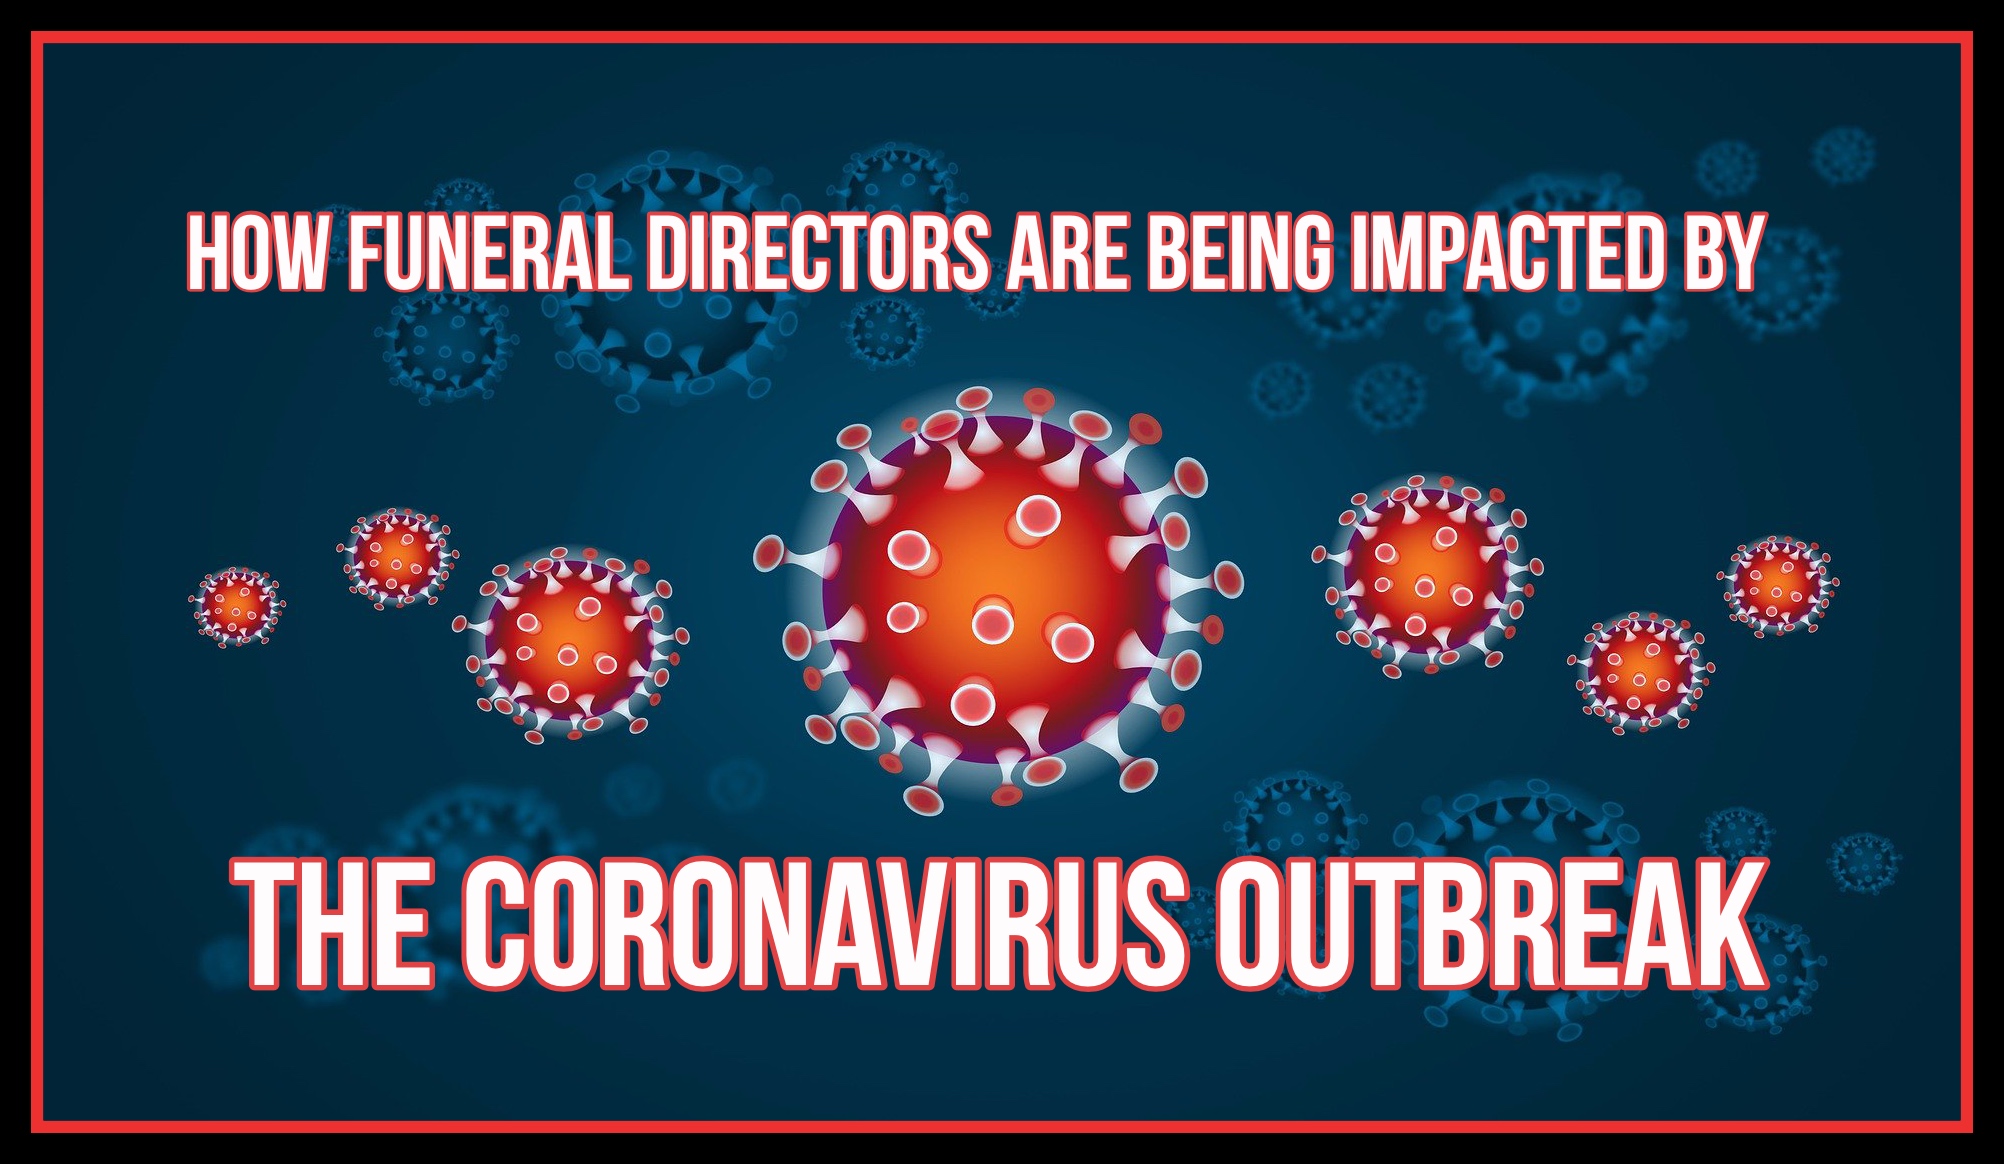 7 Ways Funeral Homes Are Being Impacted By The Coronavirus